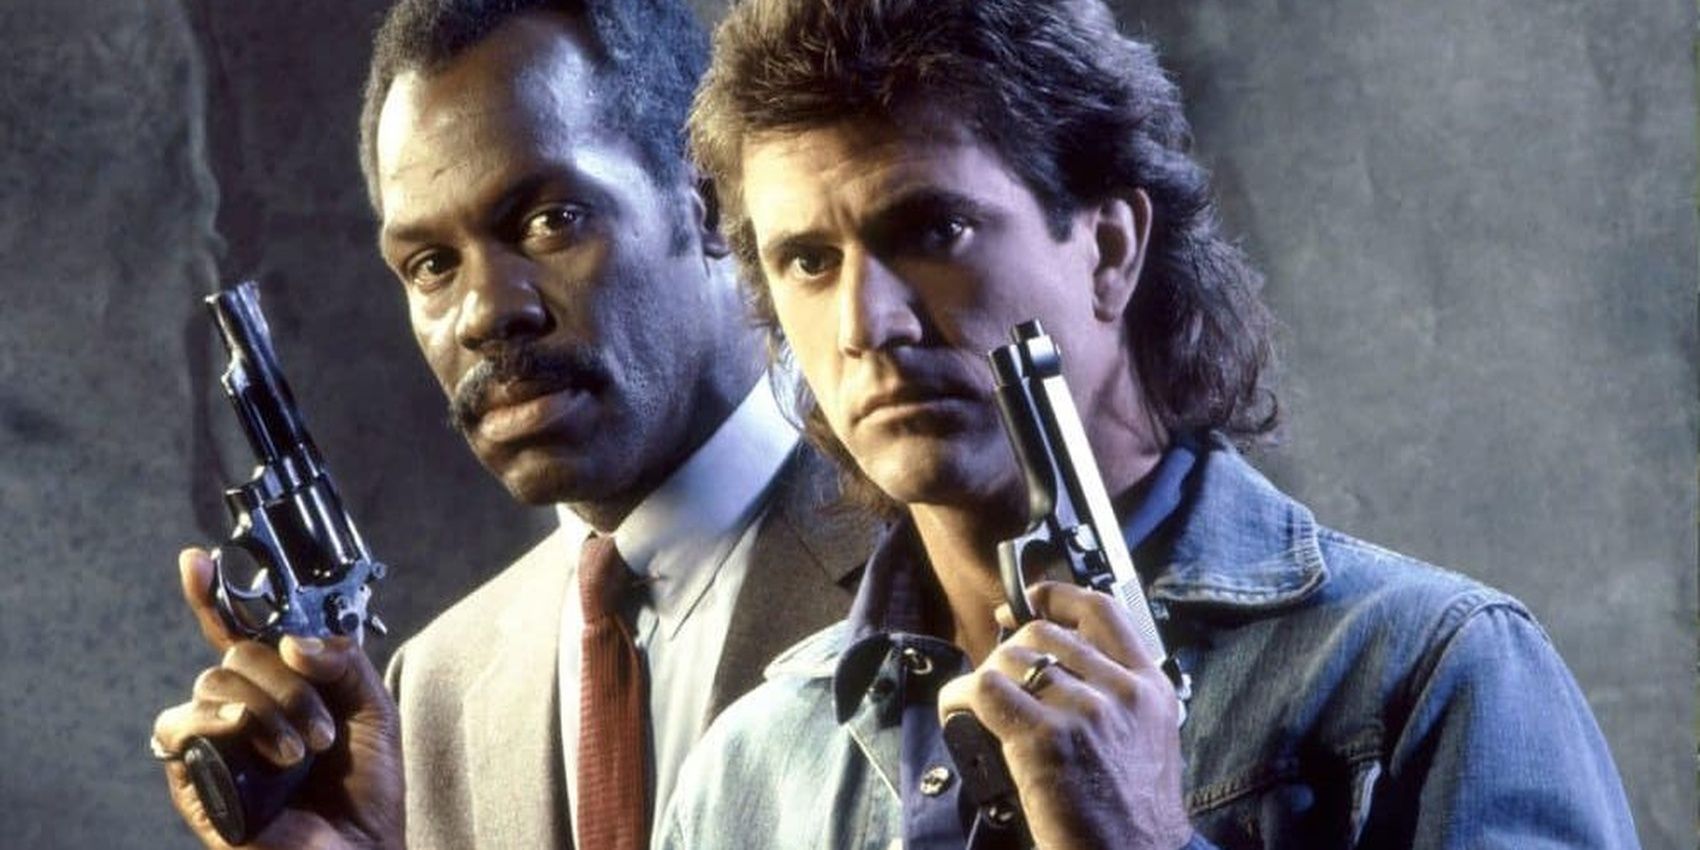 Mel Gibson and Danny Glover holding guns in a promo image for Lethal Weapon 